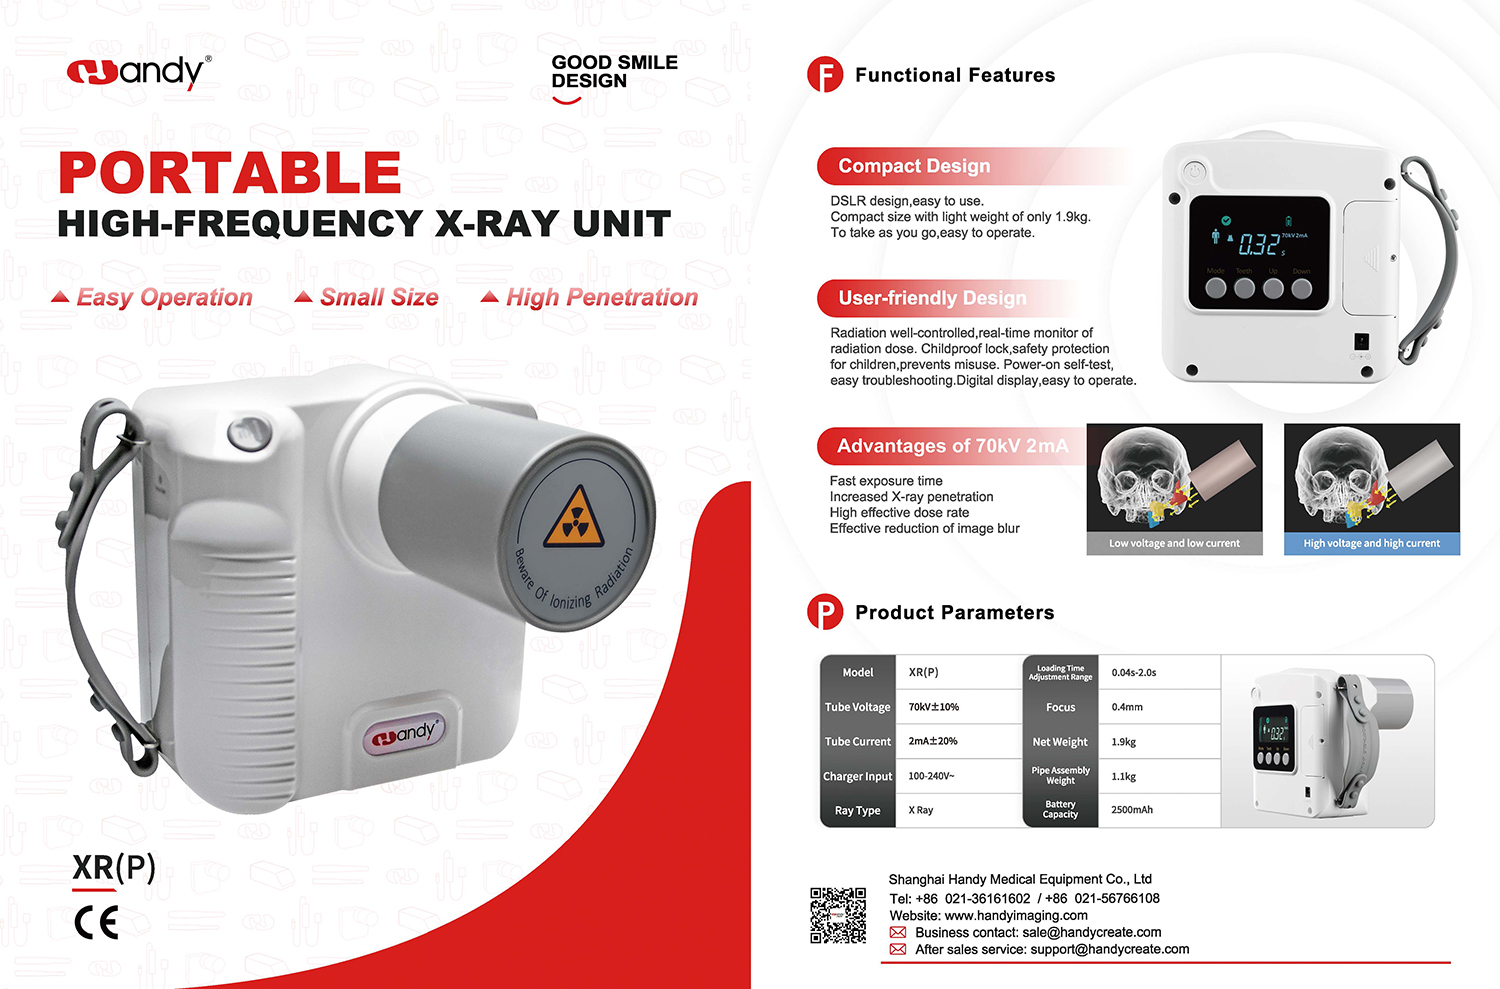 Portable High-Frequency X-Ray Unit (2)